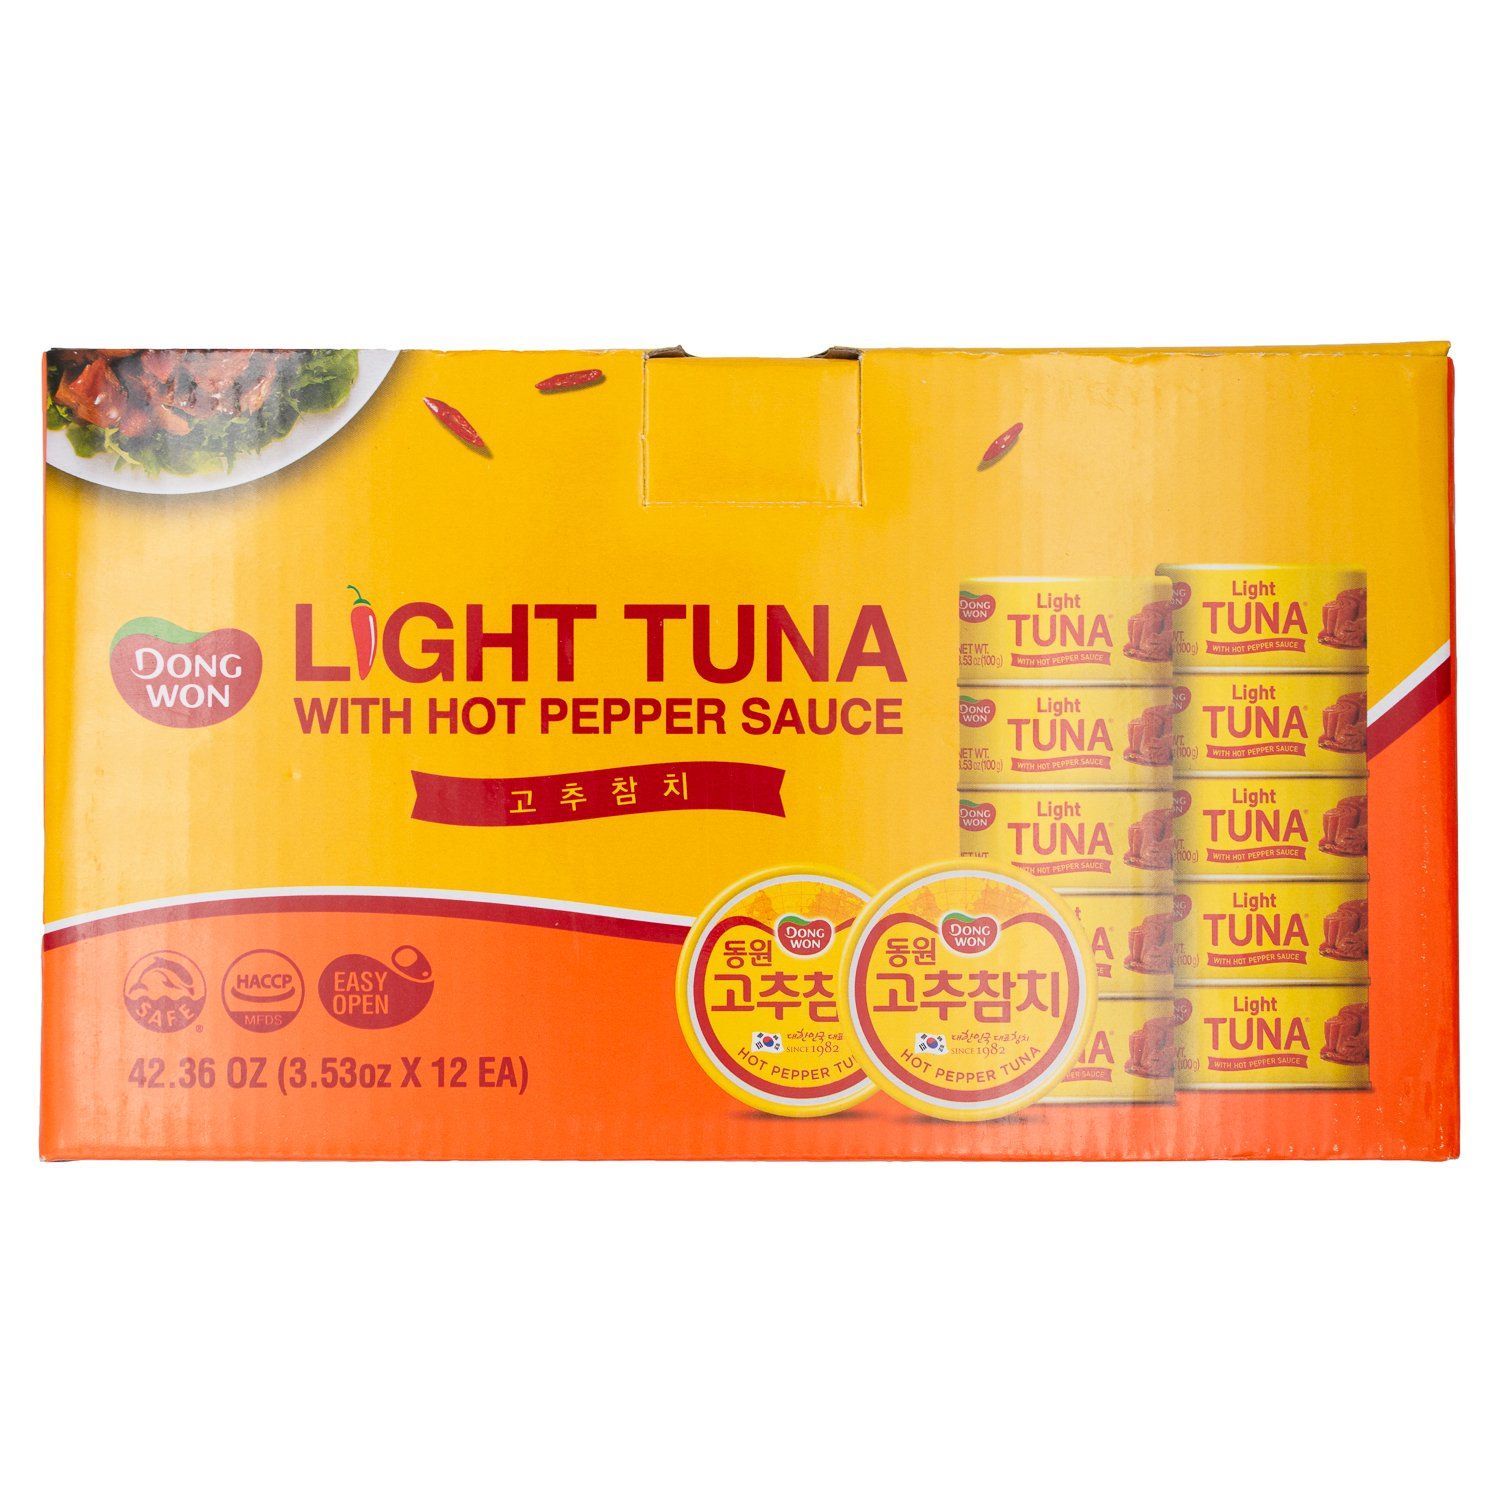 Dongwon Tuna with Hot Pepper Sauce Dongwon Light 3.53 Oz-12 Count 